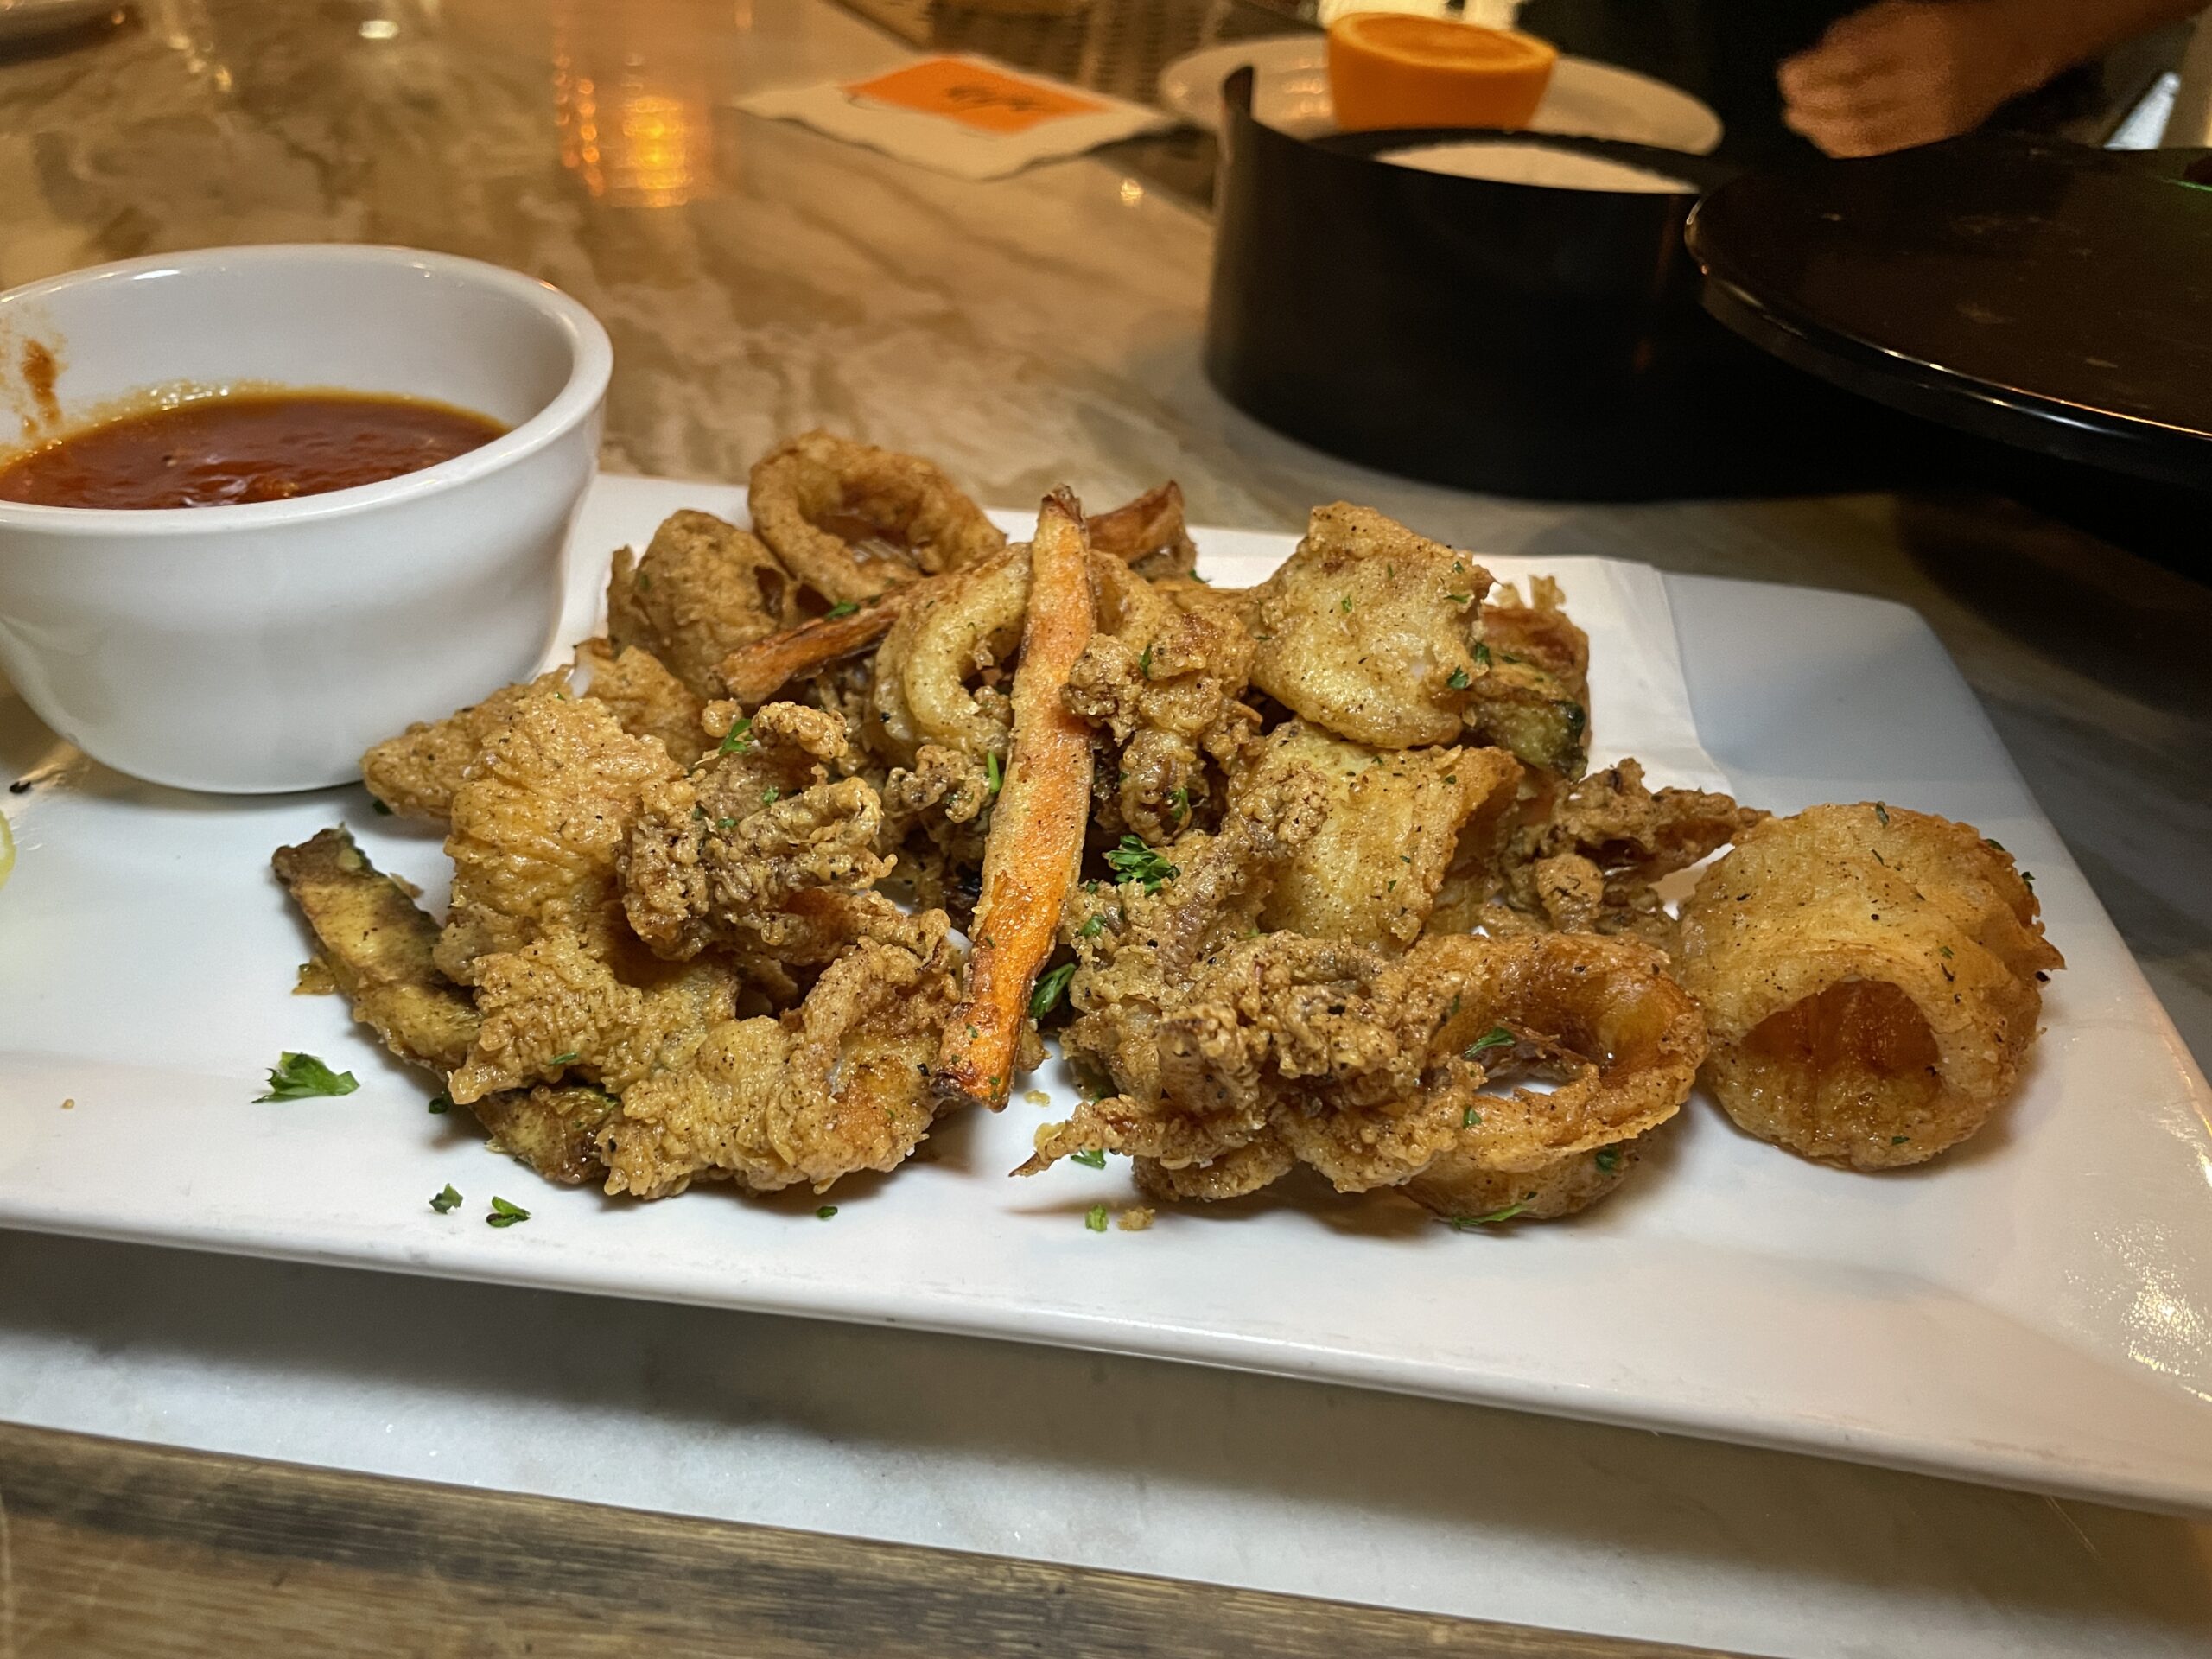 Located next door to Ugo, Culver City's beloved neighborhood Italian restaurant sits The Lounge at Ugo, an intimate, elevated social gathering space offering craft cocktails and sharable plates, like this mouthwatering Calamari.